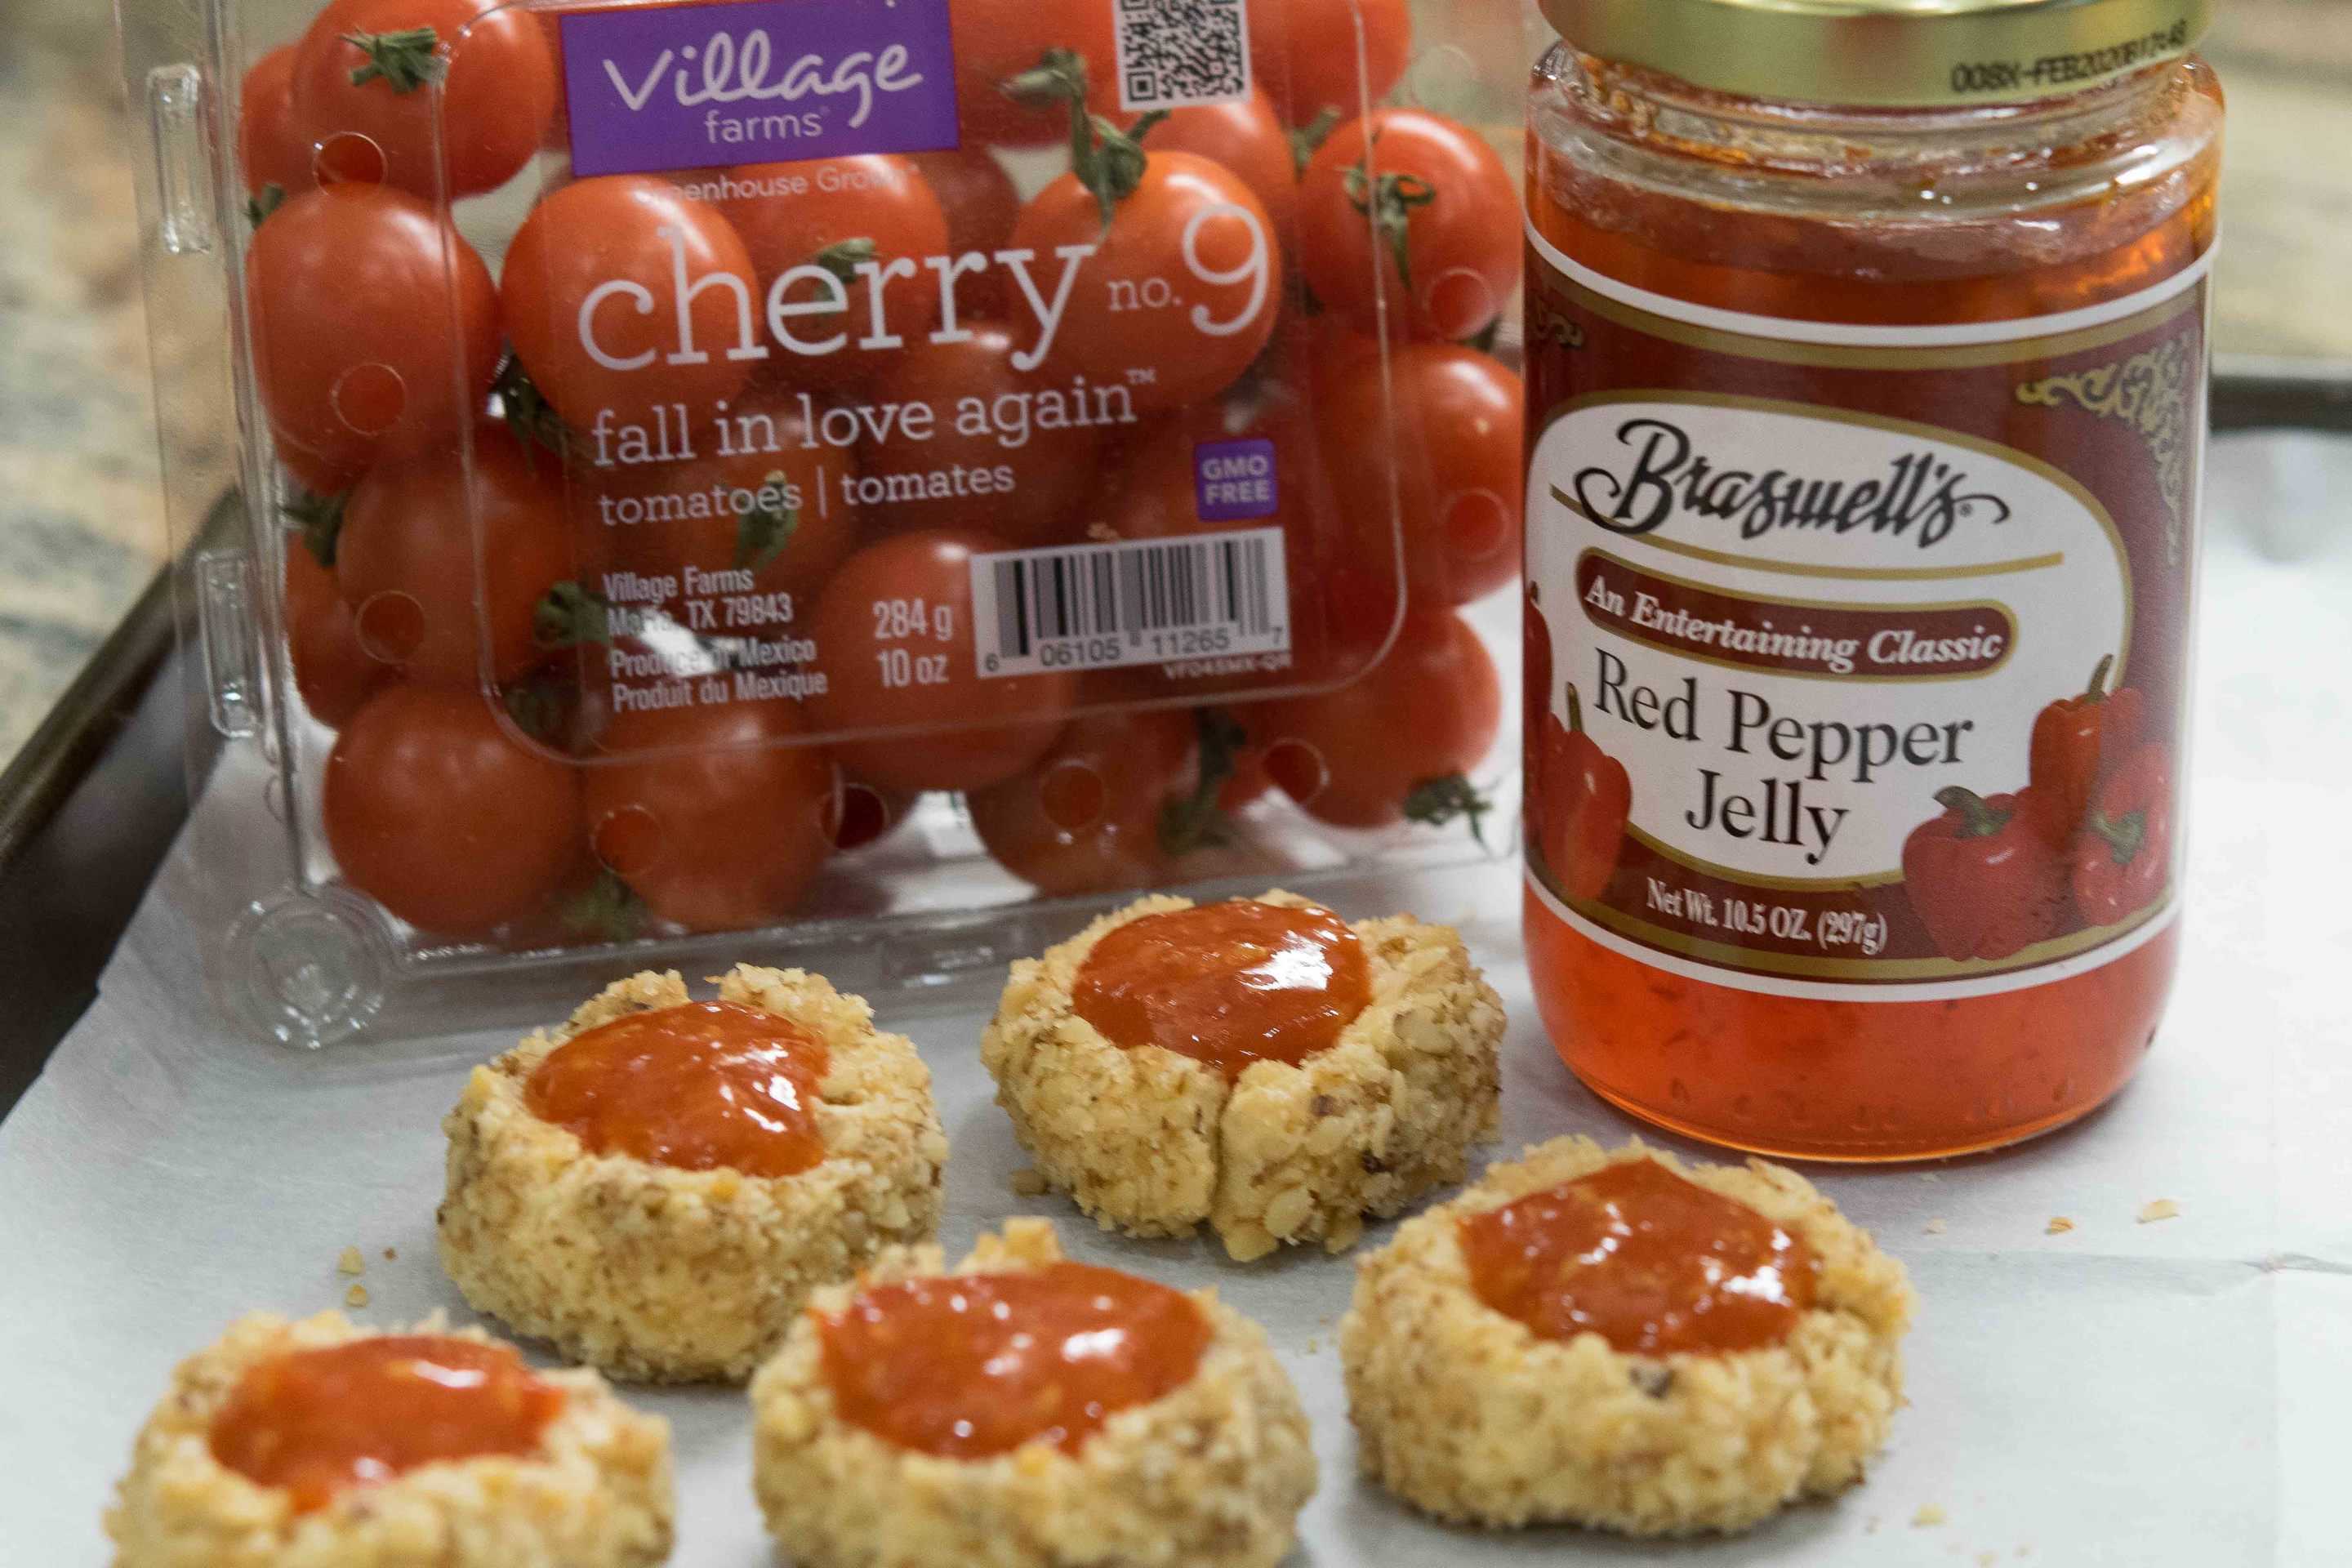 5 Thumbprint Cookies shown with Cherry Tomatoes and Red Pepper Jelly - Photo by Nancy Farrar